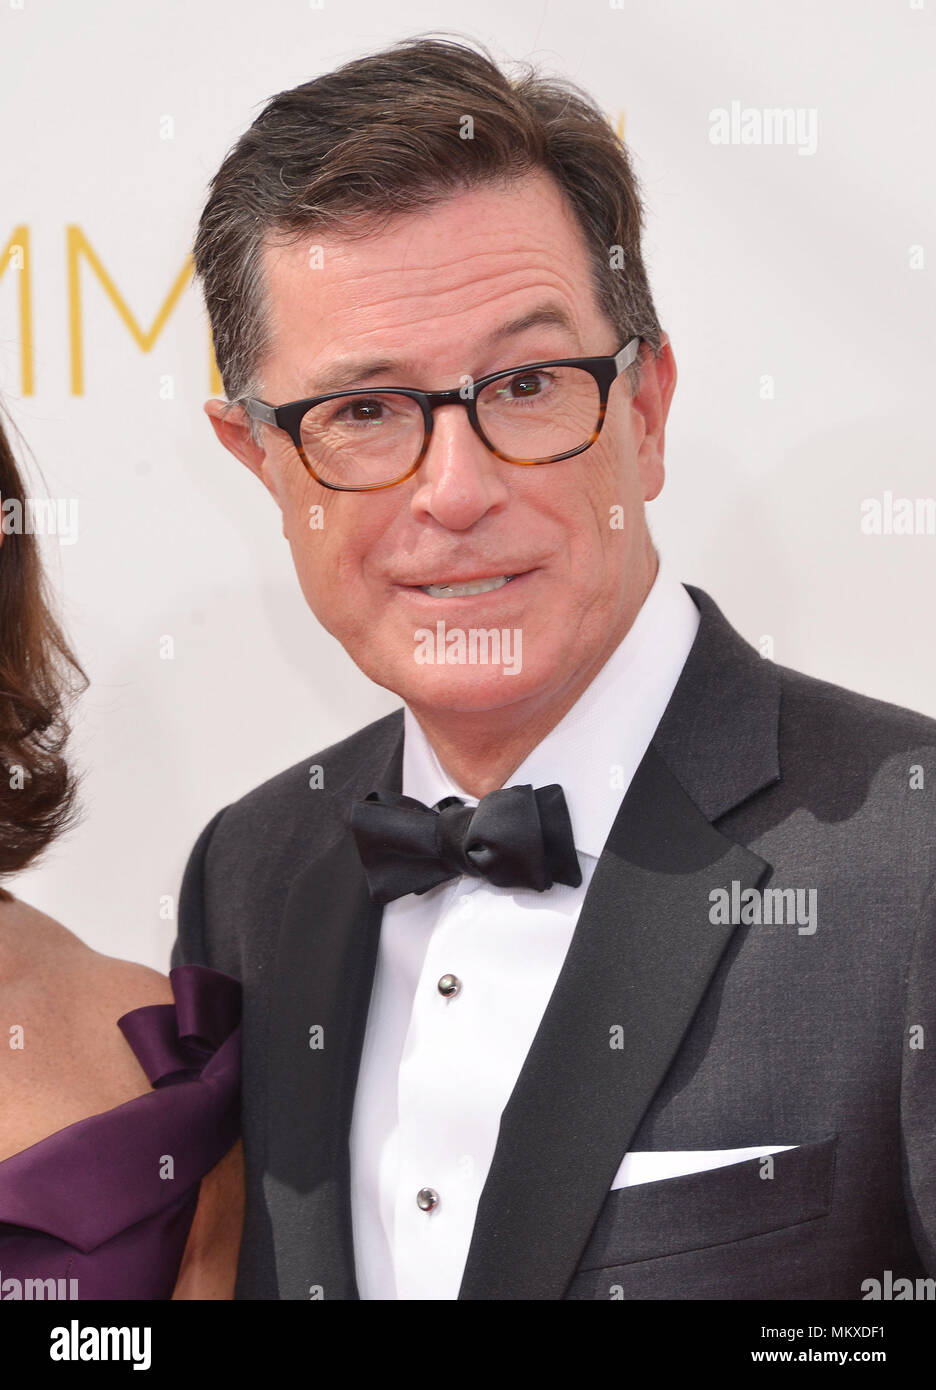 Stephen Colbert  at the  66th Emmy Awards 2014 at the Nokia Center in Los Angeles.Stephen Colbert  Red Carpet Event, Vertical, USA, Film Industry, Celebrities,  Photography, Bestof, Arts Culture and Entertainment, Topix Celebrities fashion /  Vertical, Best of, Event in Hollywood Life - California,  Red Carpet and backstage, USA, Film Industry, Celebrities,  movie celebrities, TV celebrities, Music celebrities, Photography, Bestof, Arts Culture and Entertainment,  Topix, headshot, vertical, one person,, from the year , 2014, inquiry tsuni@Gamma-USA.com Stock Photo